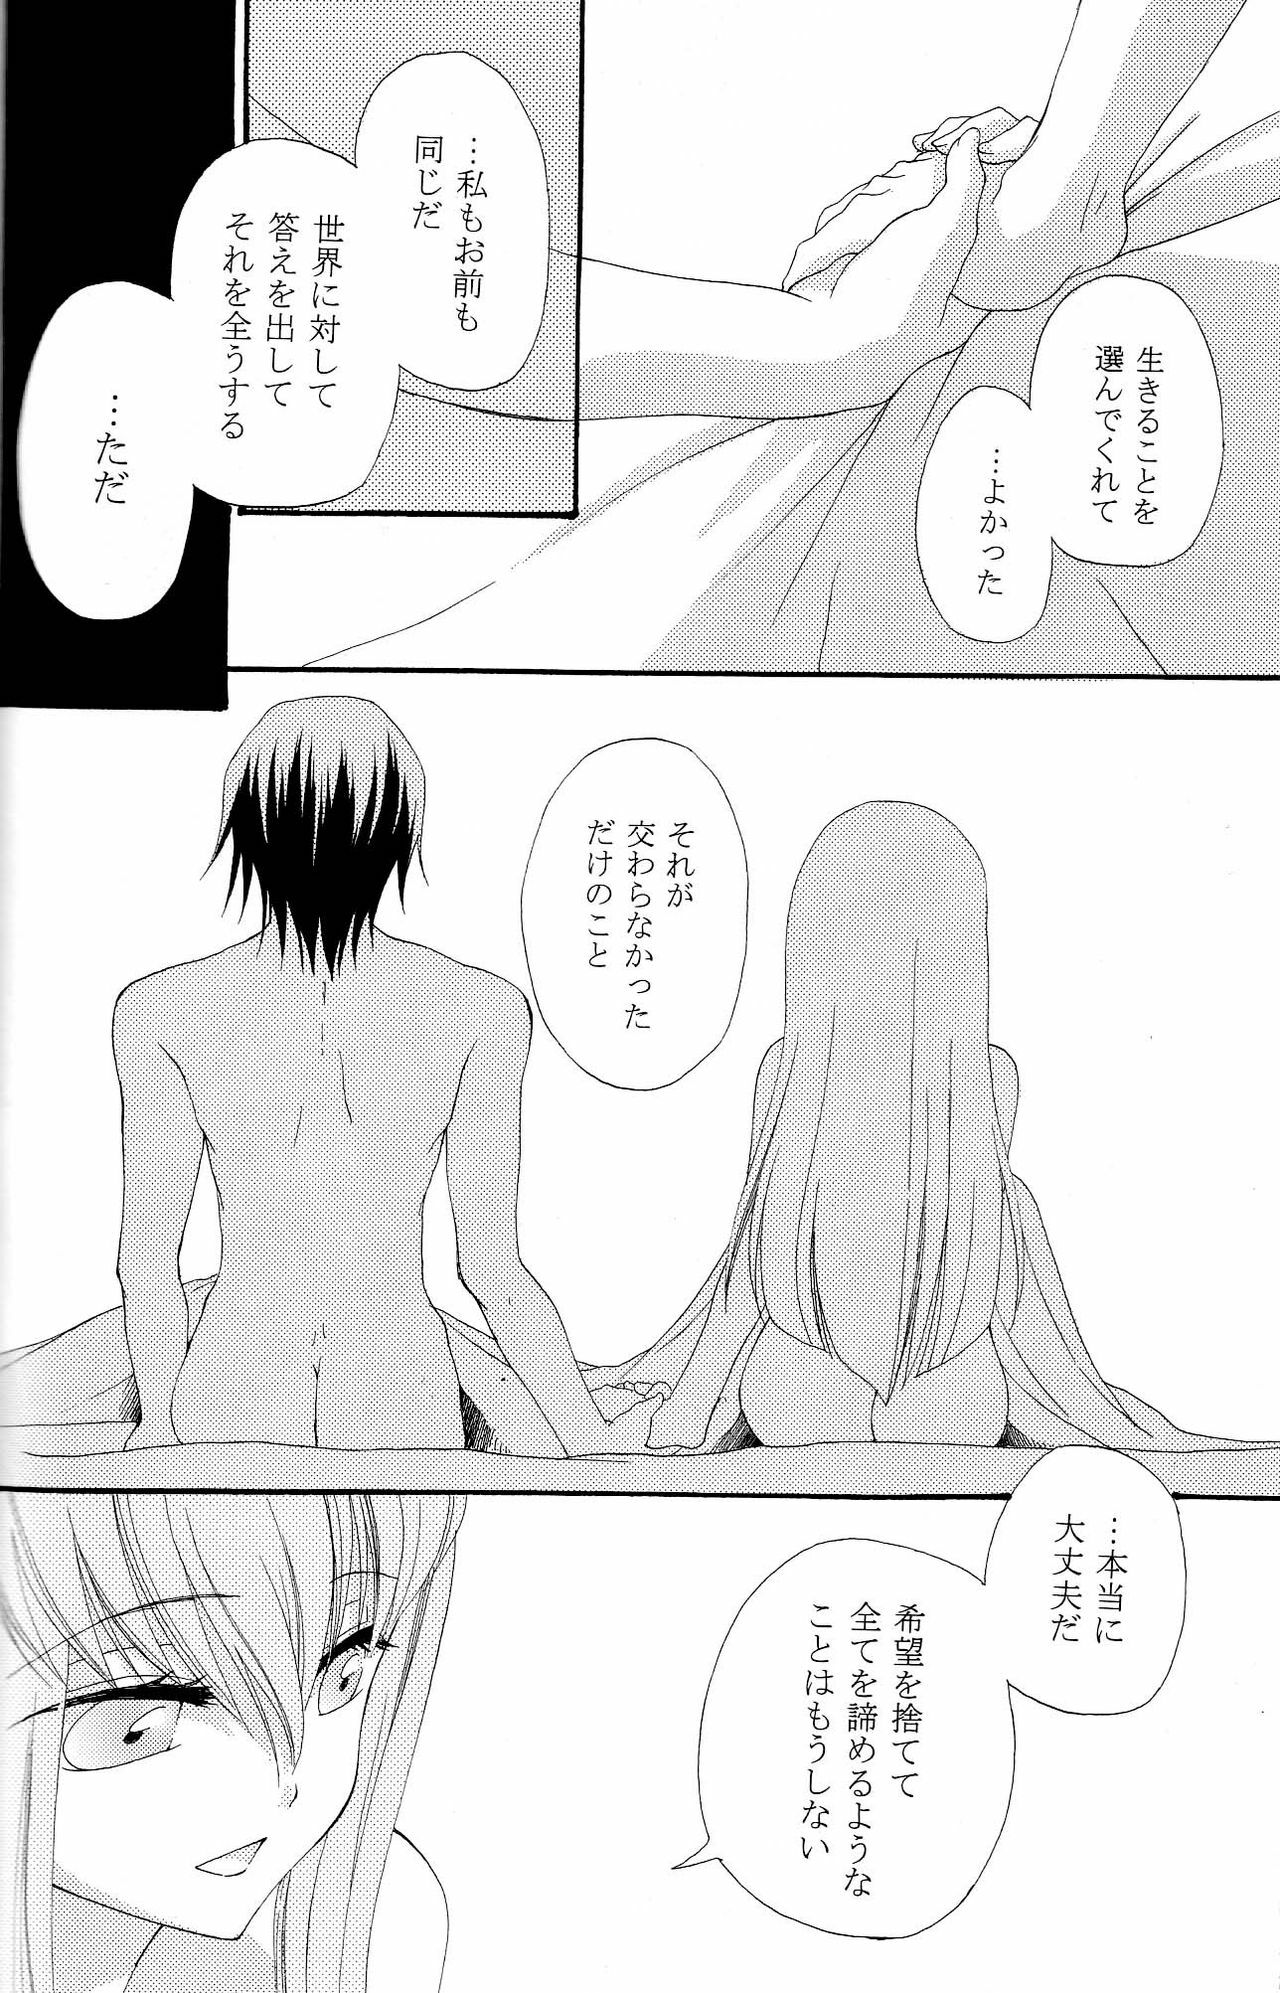 [APRICOT TEA] The last love letter presented to my dear only partner. (Code Geass) page 27 full